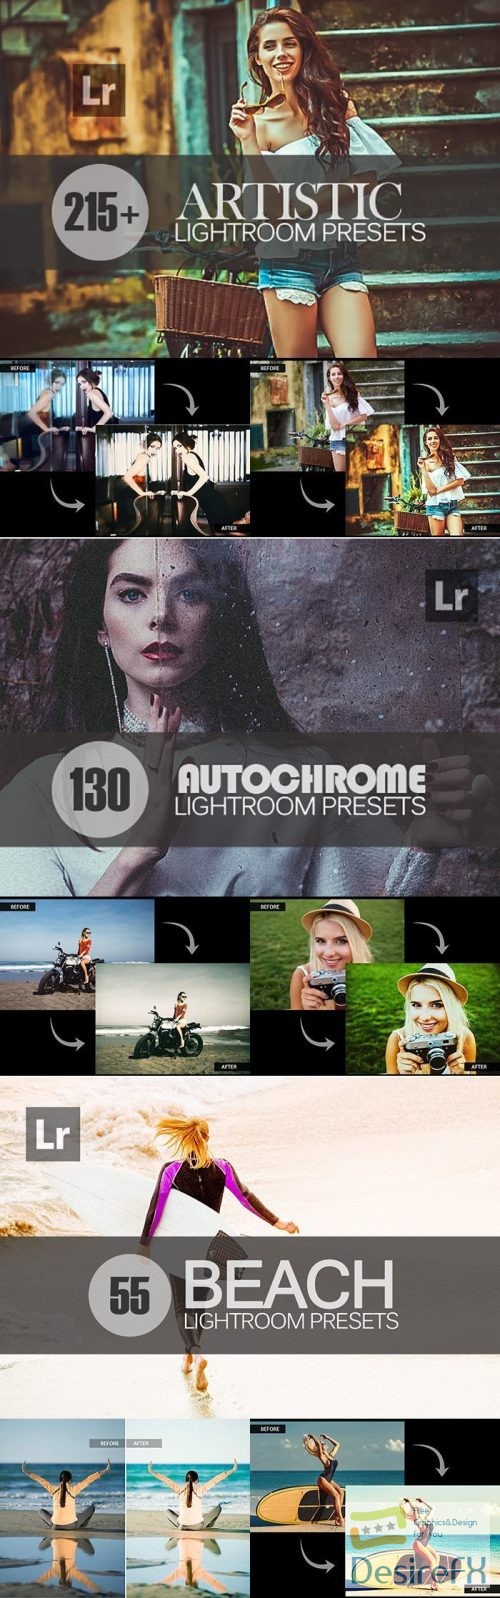 11.000+ Advanced Lightroom Presets Collection